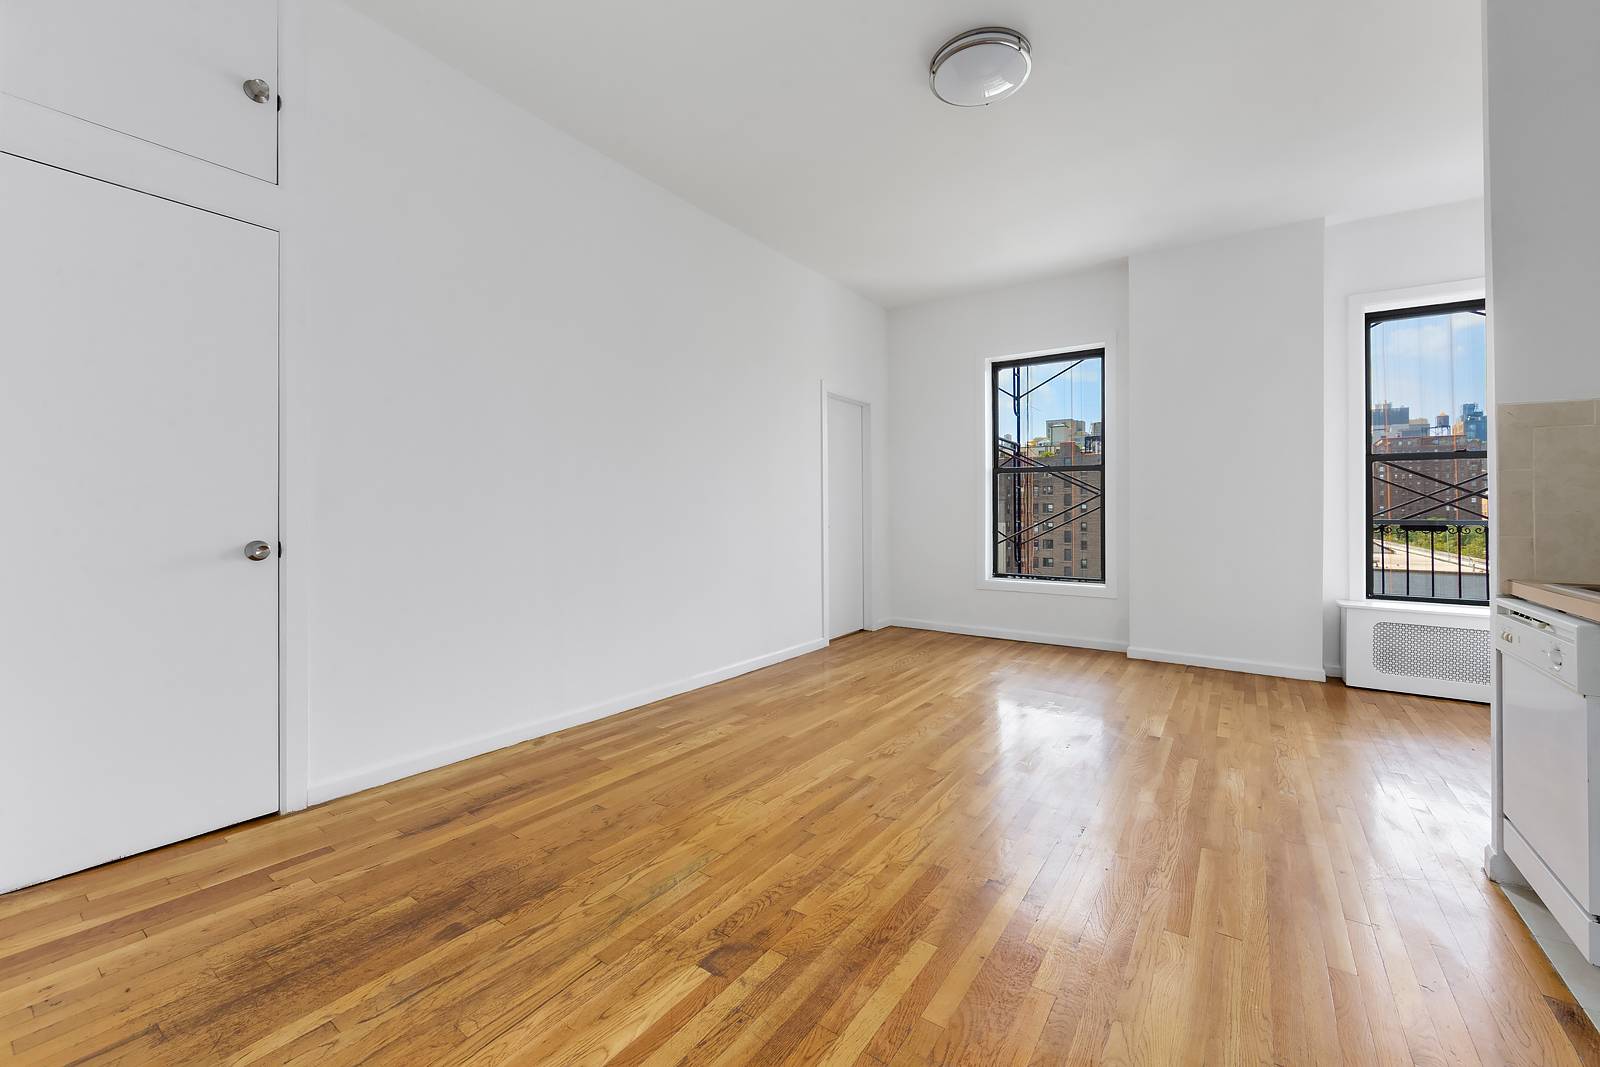 Large  one bedroom rental  in elevator building on the best block on the UWS